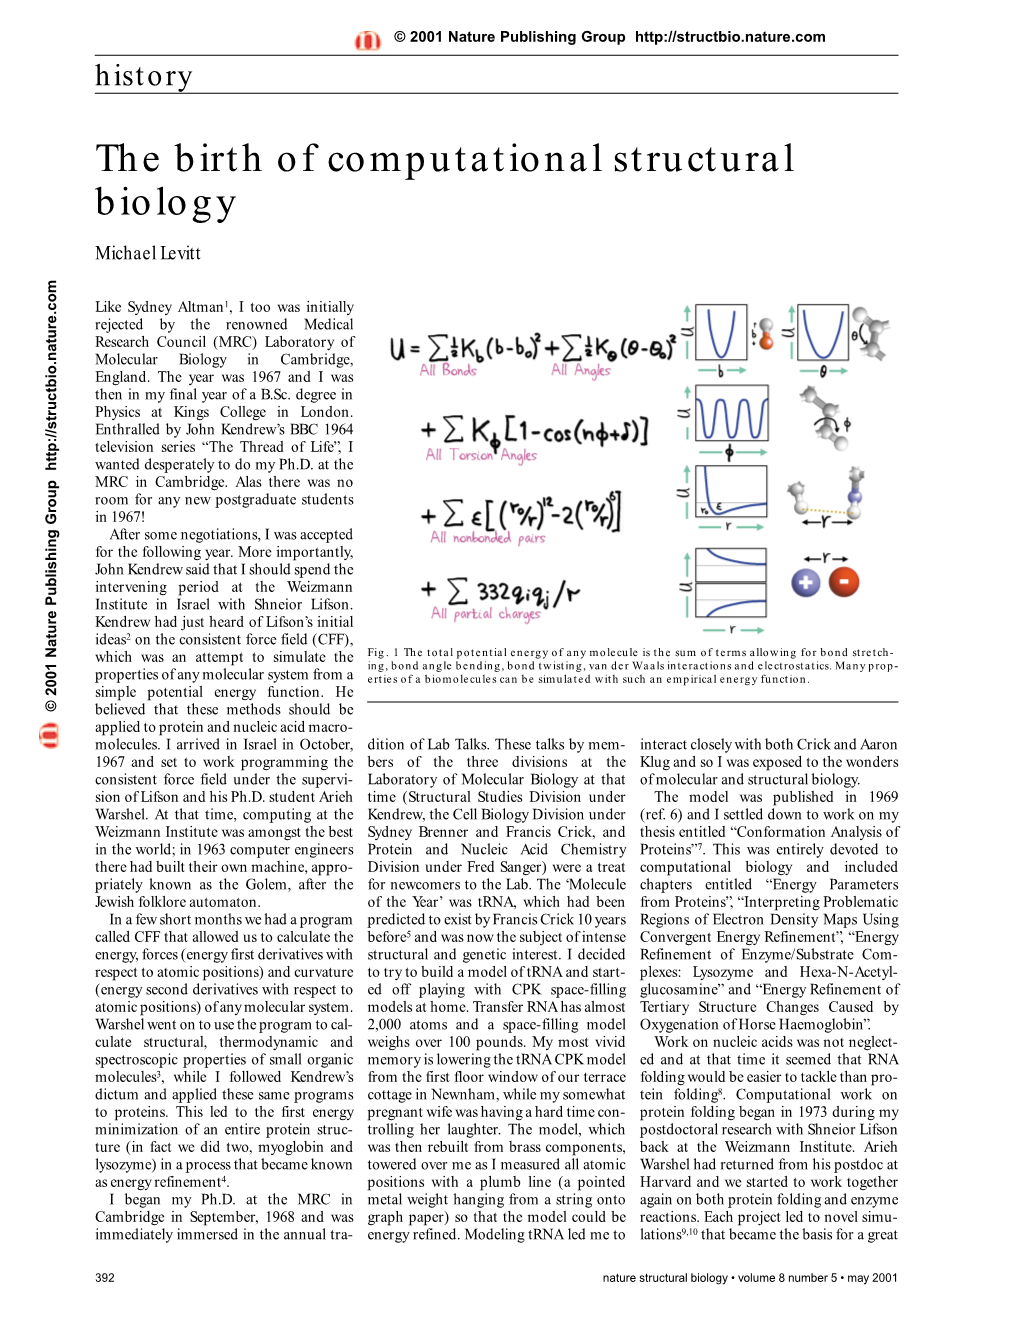 The Birth of Computational Structural Biology